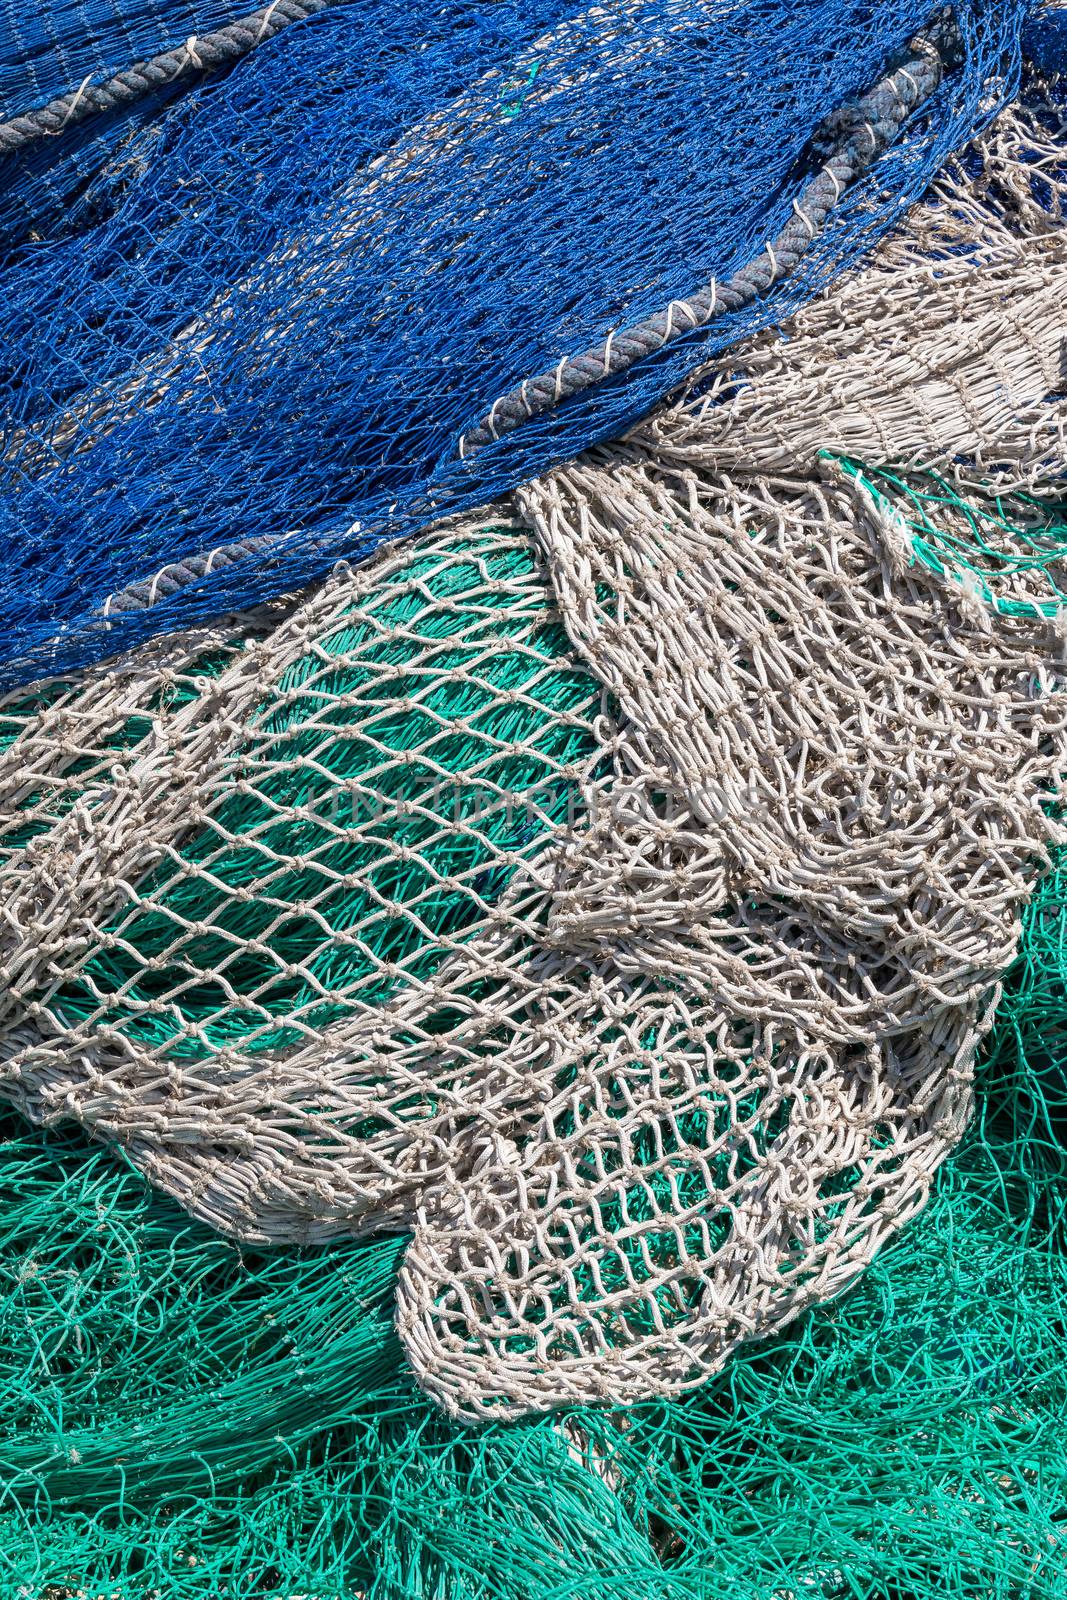 Fishing nets drying after the fishing